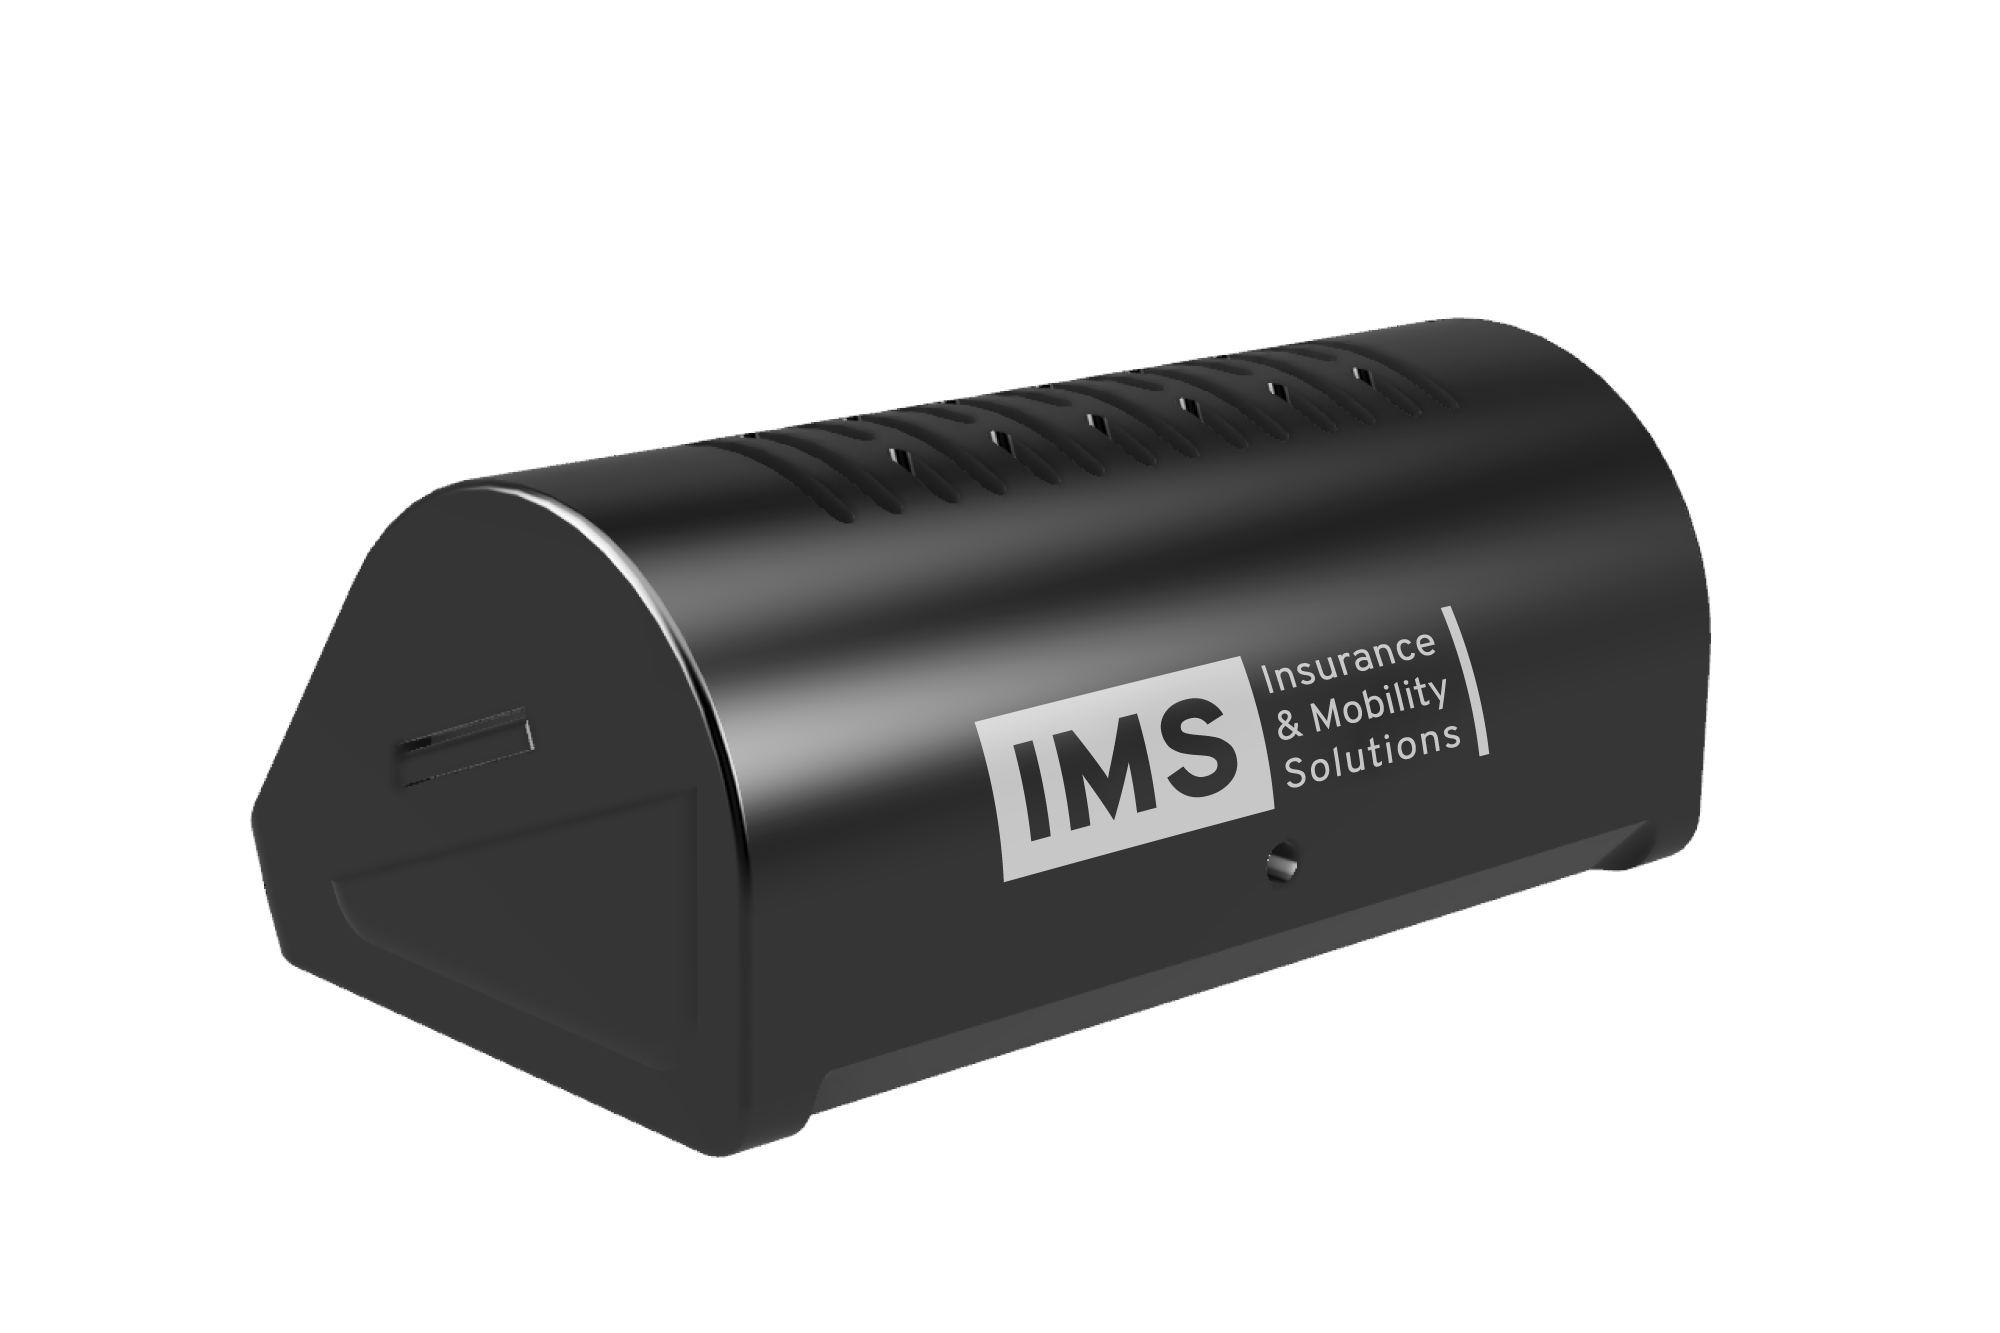 Utilizing IMS' new Wedge telematics sensor to transmit data via the policyholder’s smartphone, the IMS Connected Claims solution can be deployed for as little as $1 per policy, per month – with the opportunity for a near-term 3x return on investment (ROI) via claims cost reduction.